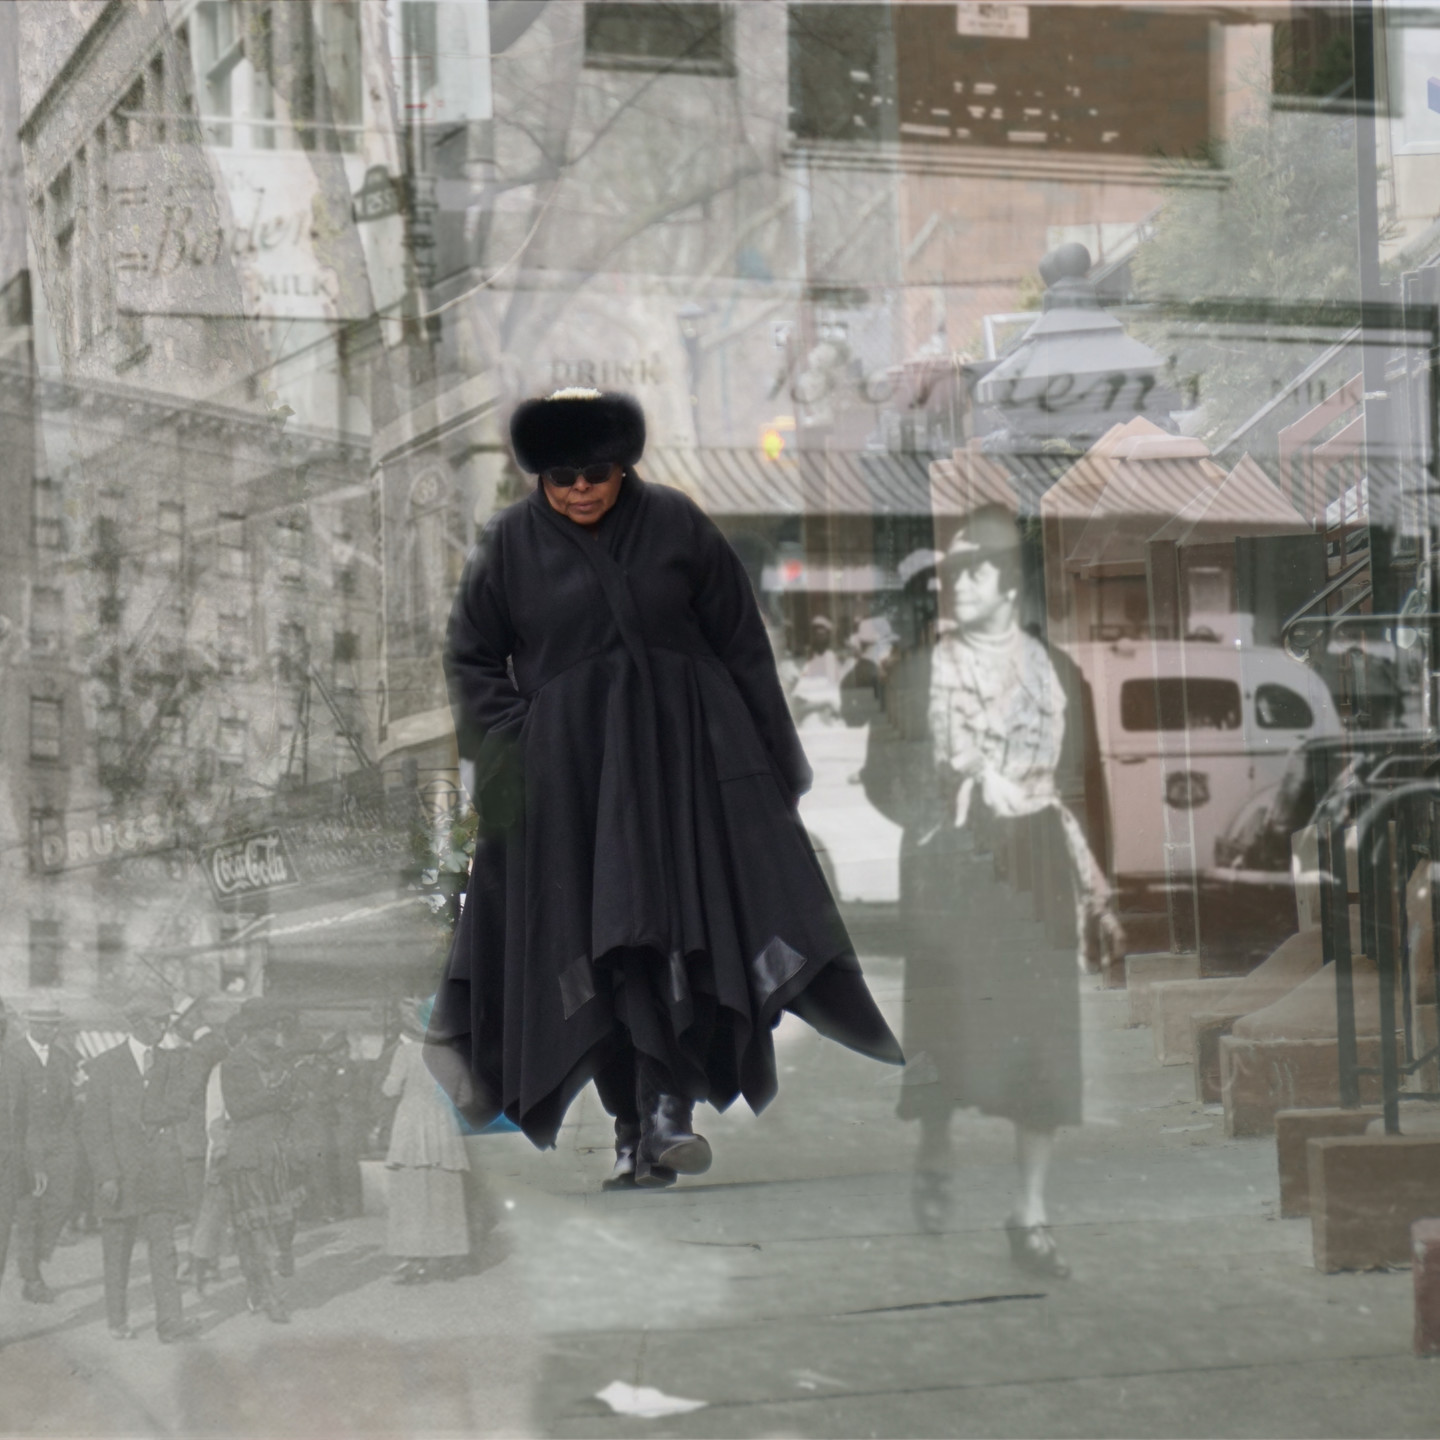 A photo montage shows a present-day individual with dark skin and clothing walking and is overlayed on a historical black-and-white photograph of a city neighborhood. The present-day individual appears to walk next to an individual in the historical photo.